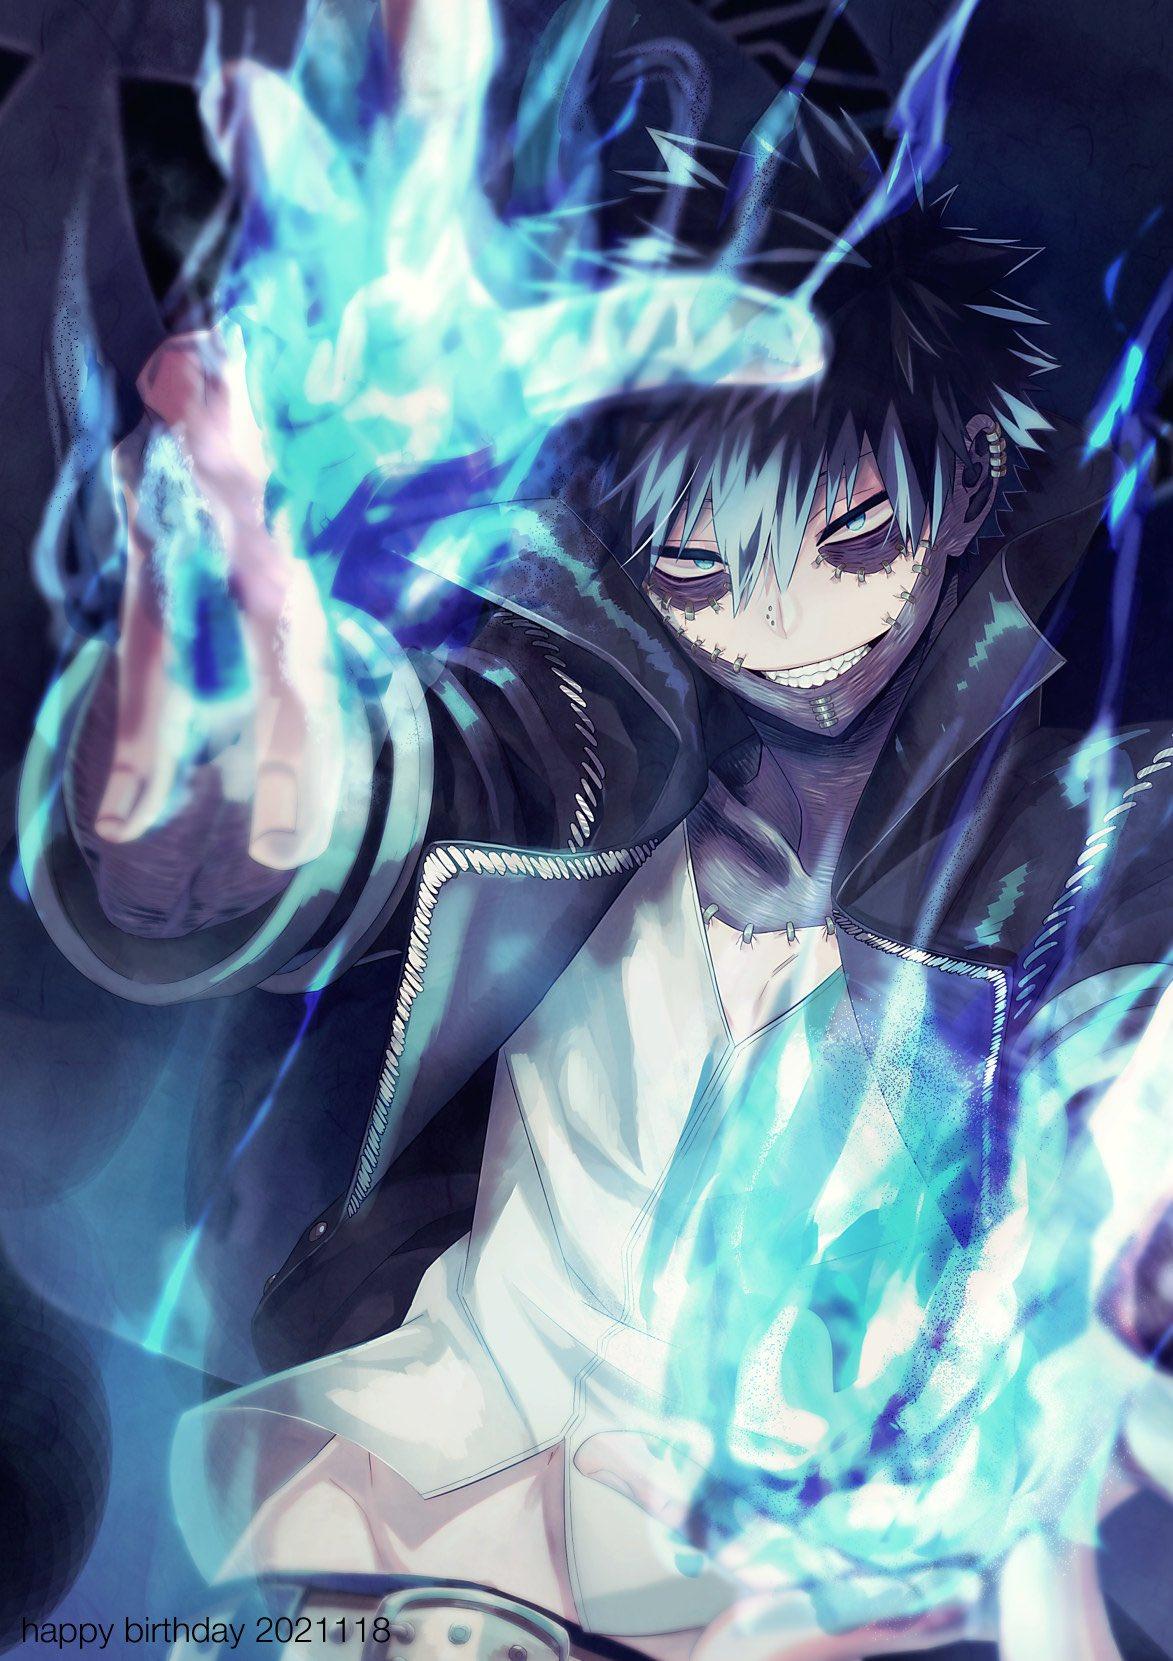 Shoto and Dabi Wallpapers - Top Free Shoto and Dabi Backgrounds ...